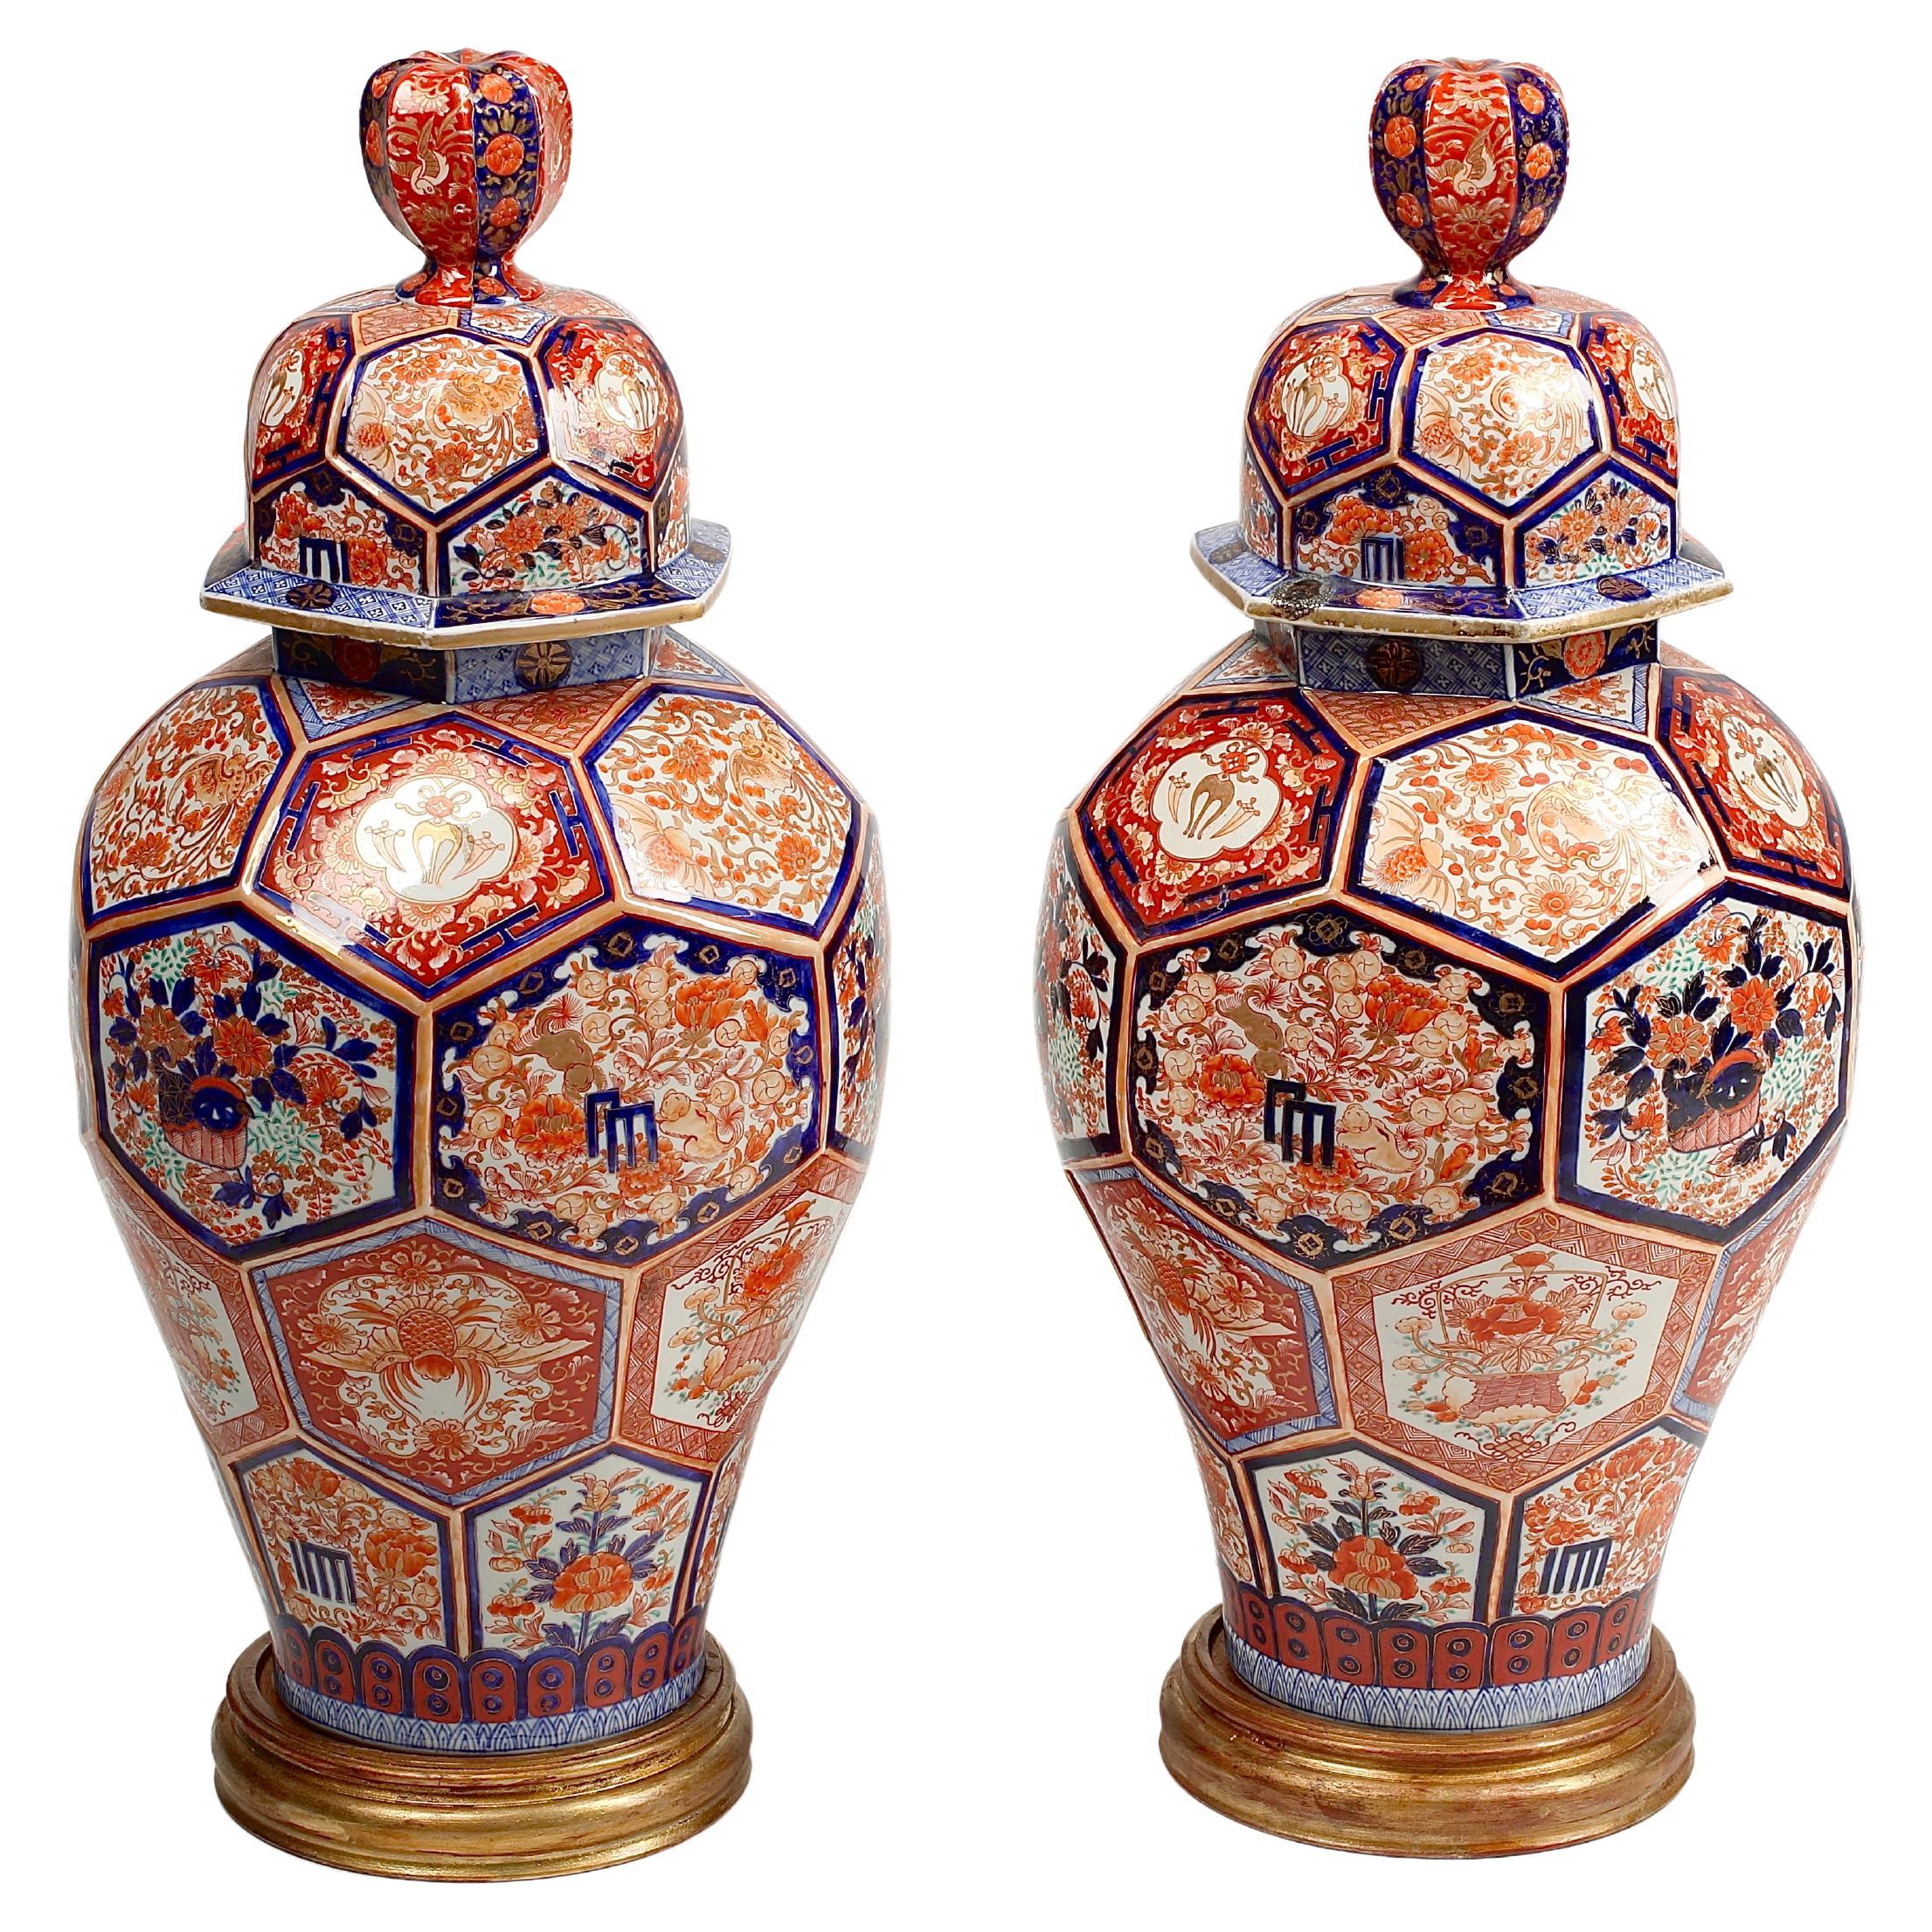 Pair of Large 19th Century Japanese Imari Porcelain Temple Jars with Cover